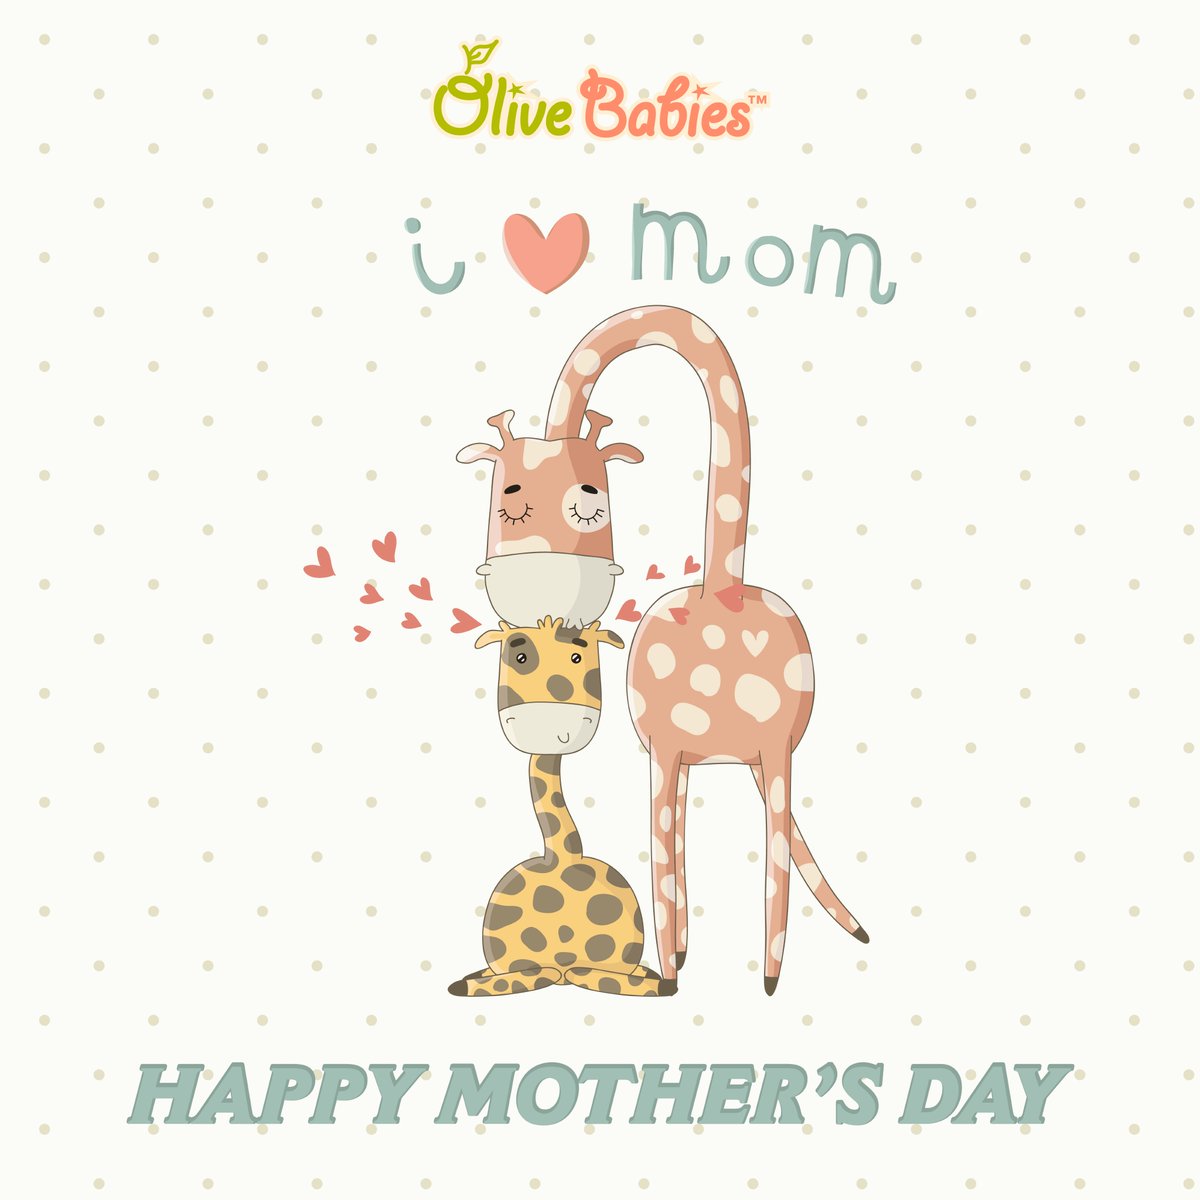 Happy Mother's Day from the Olive Babies family! 🌸💖 Today, we celebrate the superheroes in our lives – moms! Thank you for your endless love, unwavering support, and boundless strength. You're simply amazing! 💕
#OliveBabies #KidsHair #KidsHairCare #KidsHairProducts #KidsOfIG